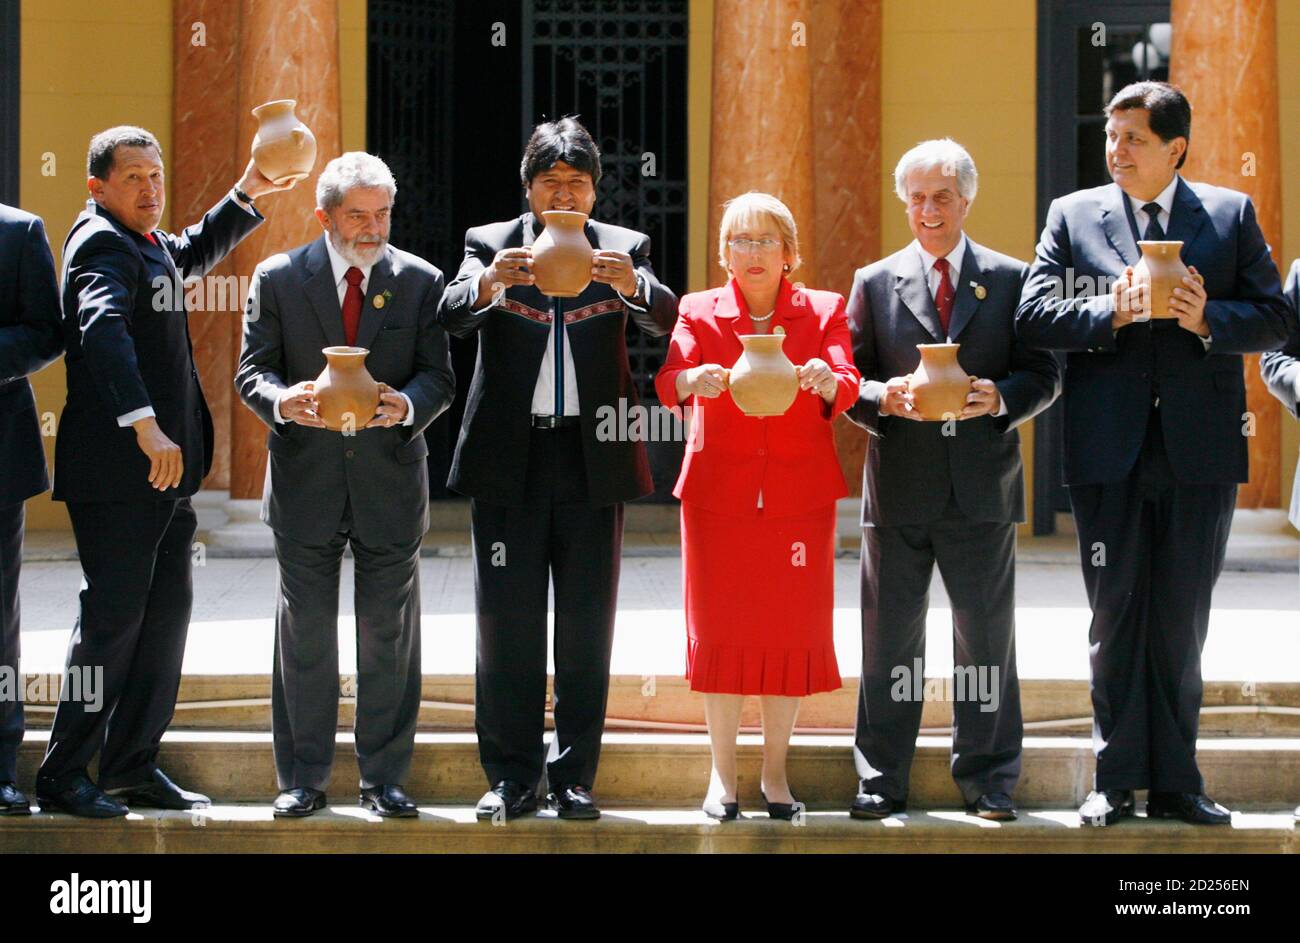 Leaders of South American countries (L-R) President of Venezuela Hugo Chavez, President of Brazil Luiz Inacio Lula Da Silva, President of Bolivia Evo Morales, President of of Chile Michelle Bachelet, President of Uruguay Tabare Vazquez and President of Peru Alan Garcia hold clay jars containing 'chicha', an alcoholic beverage preferred by indigenous peoples, during an official photo session at the South American Community of Nations summit in Cochabamba December 9, 2006.   REUTERS/Mariana Bazo   (Bolivia) Stock Photo